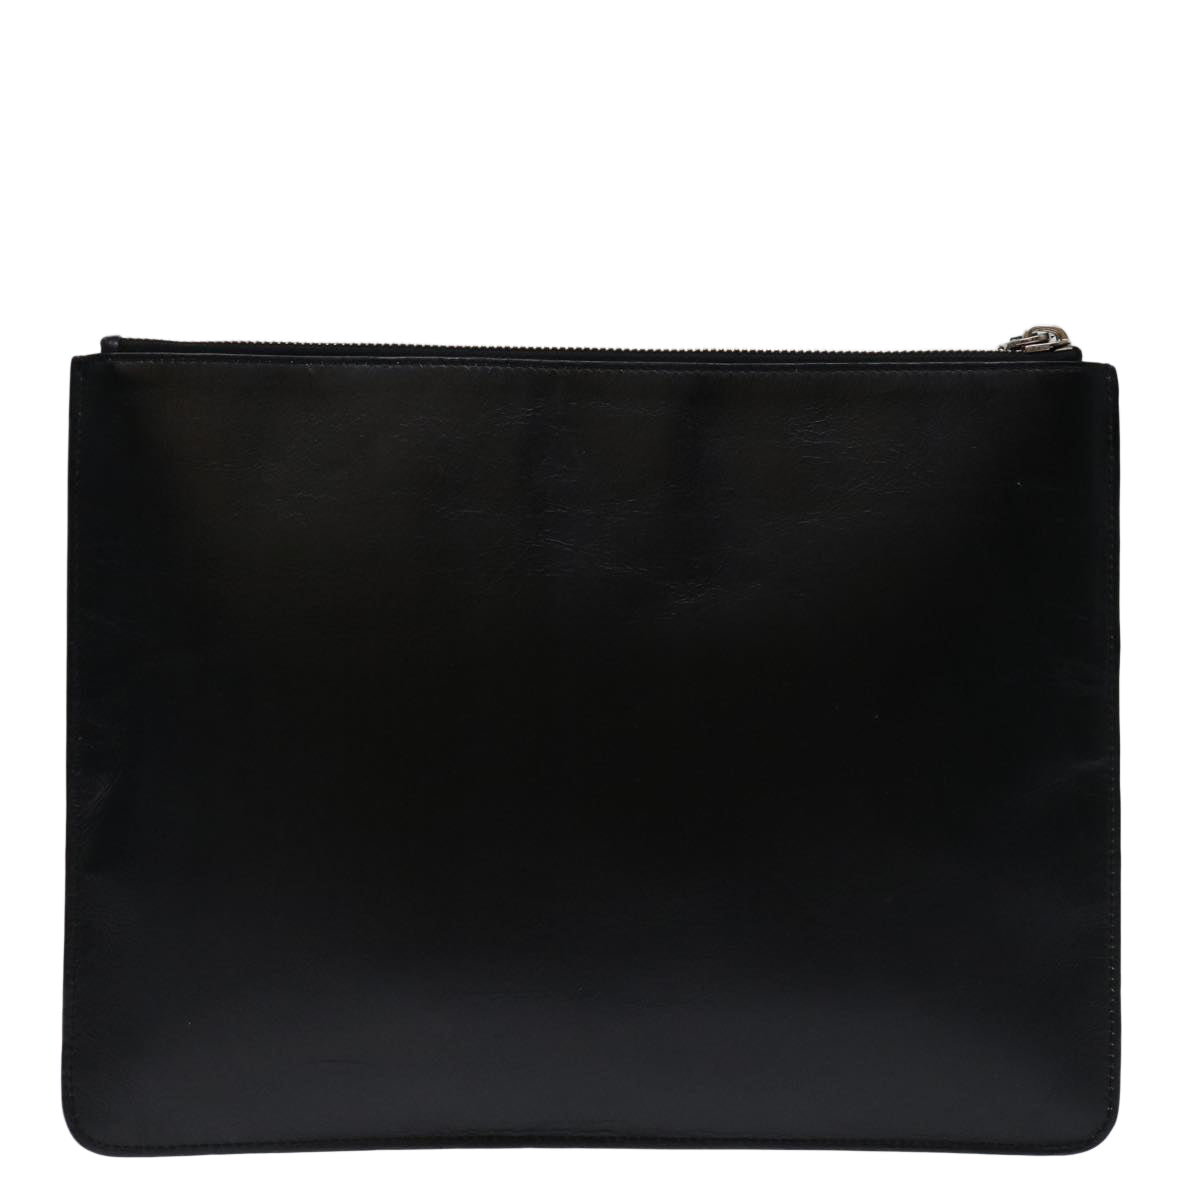 GIVENCHY Clutch Bag Leather Black Auth bs12859